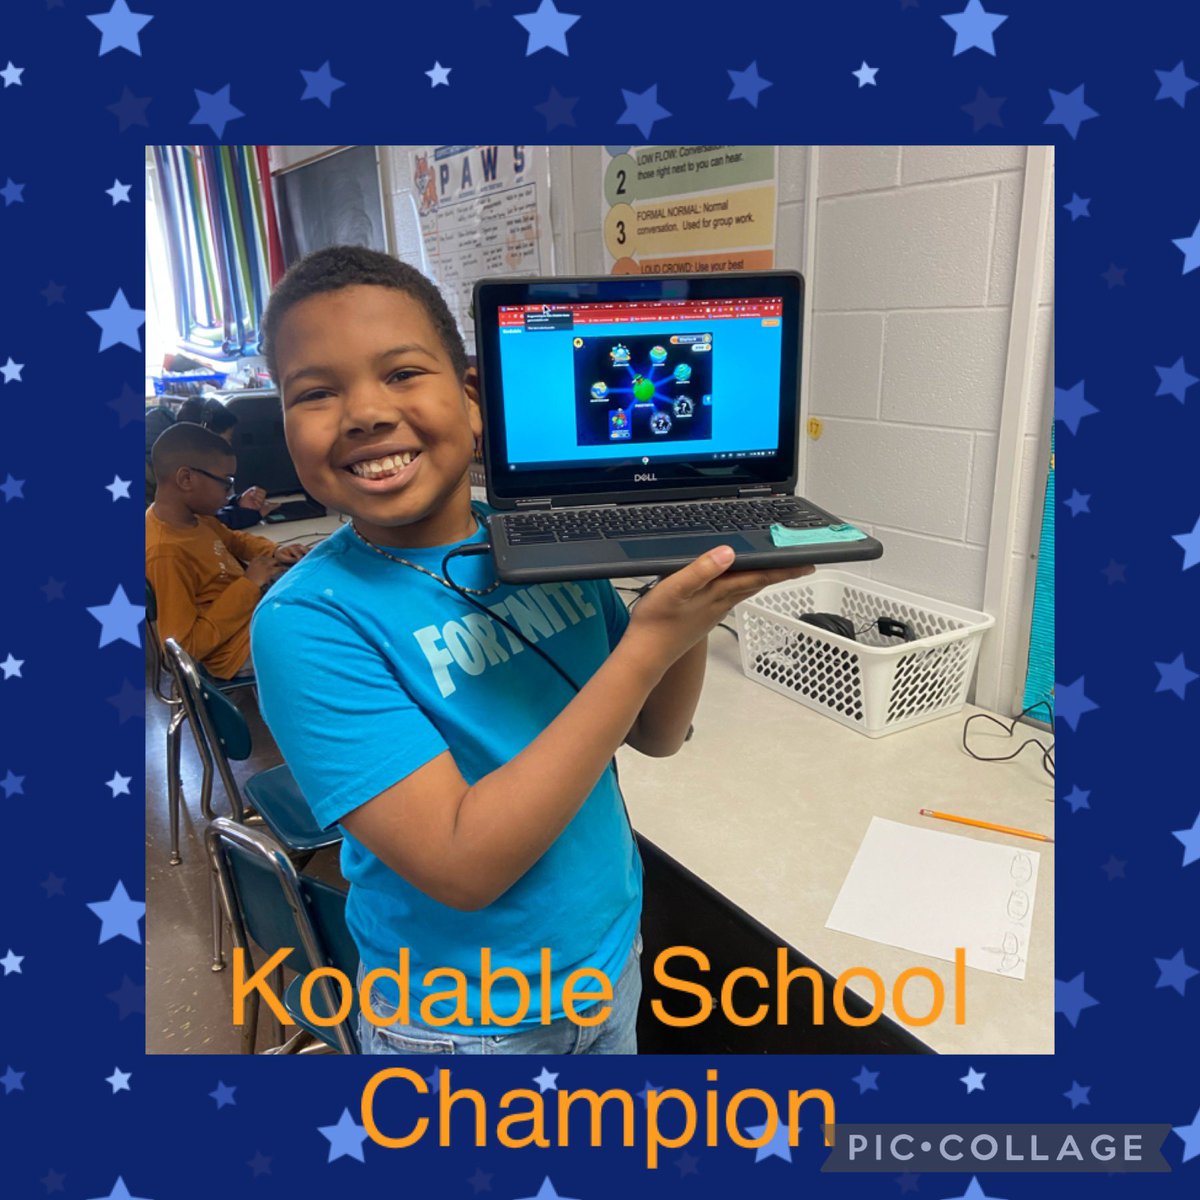 So proud of CJ @CochraneRoars. He is the first student to finish @kodable this school year. I love this program. Thank you @kodable for investing in student coders. #JCPSDigIn #TEACHCODE #KidsCanCode